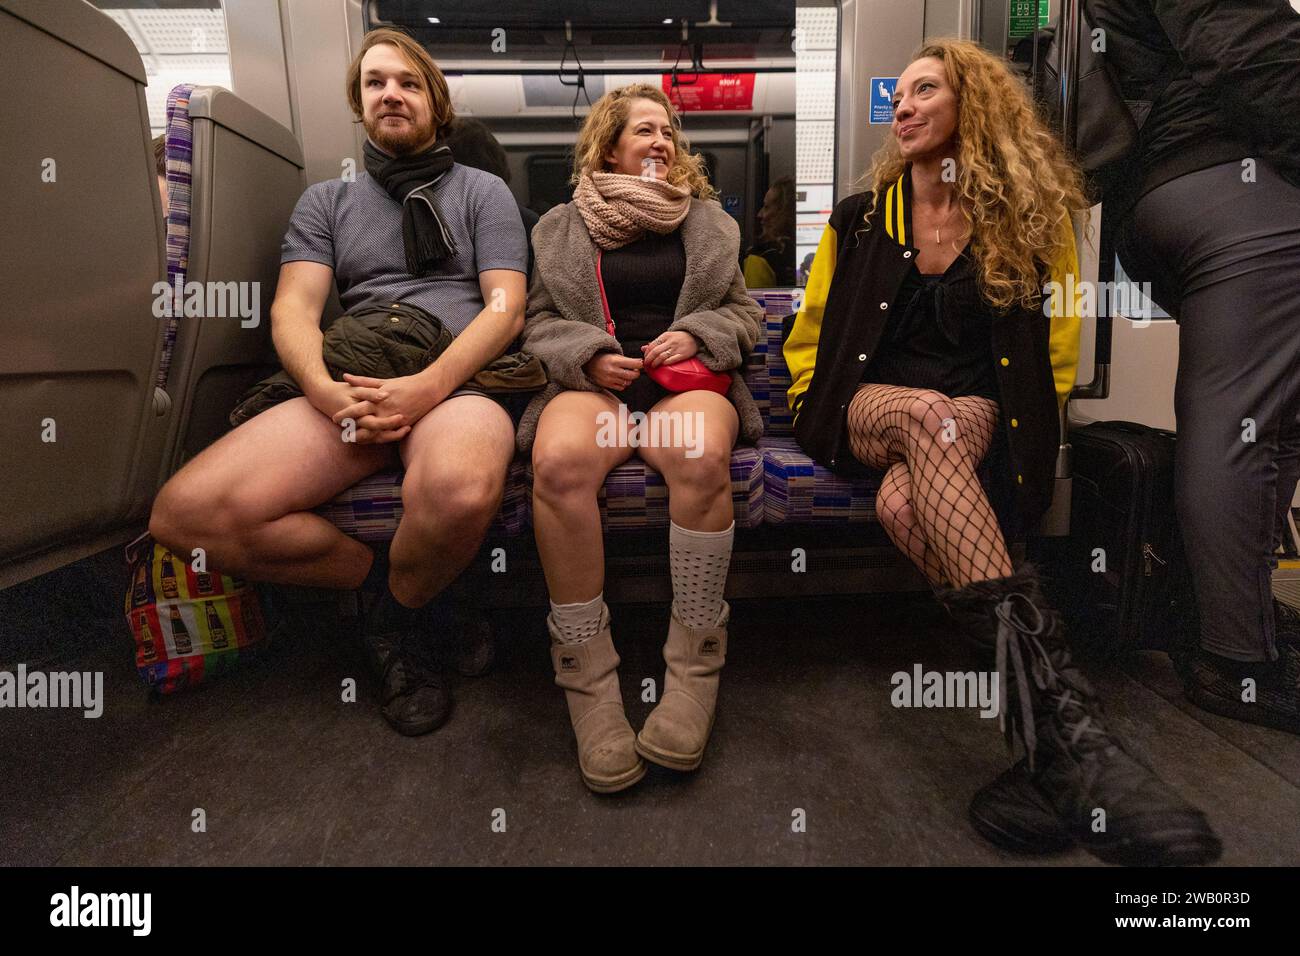 TIMES NOW - Hundreds of Londoners stripped down to their underwear for the  12th annual “No Trousers Tube Ride” - the first since the pandemic -  organised by the Stiff Upper Lip